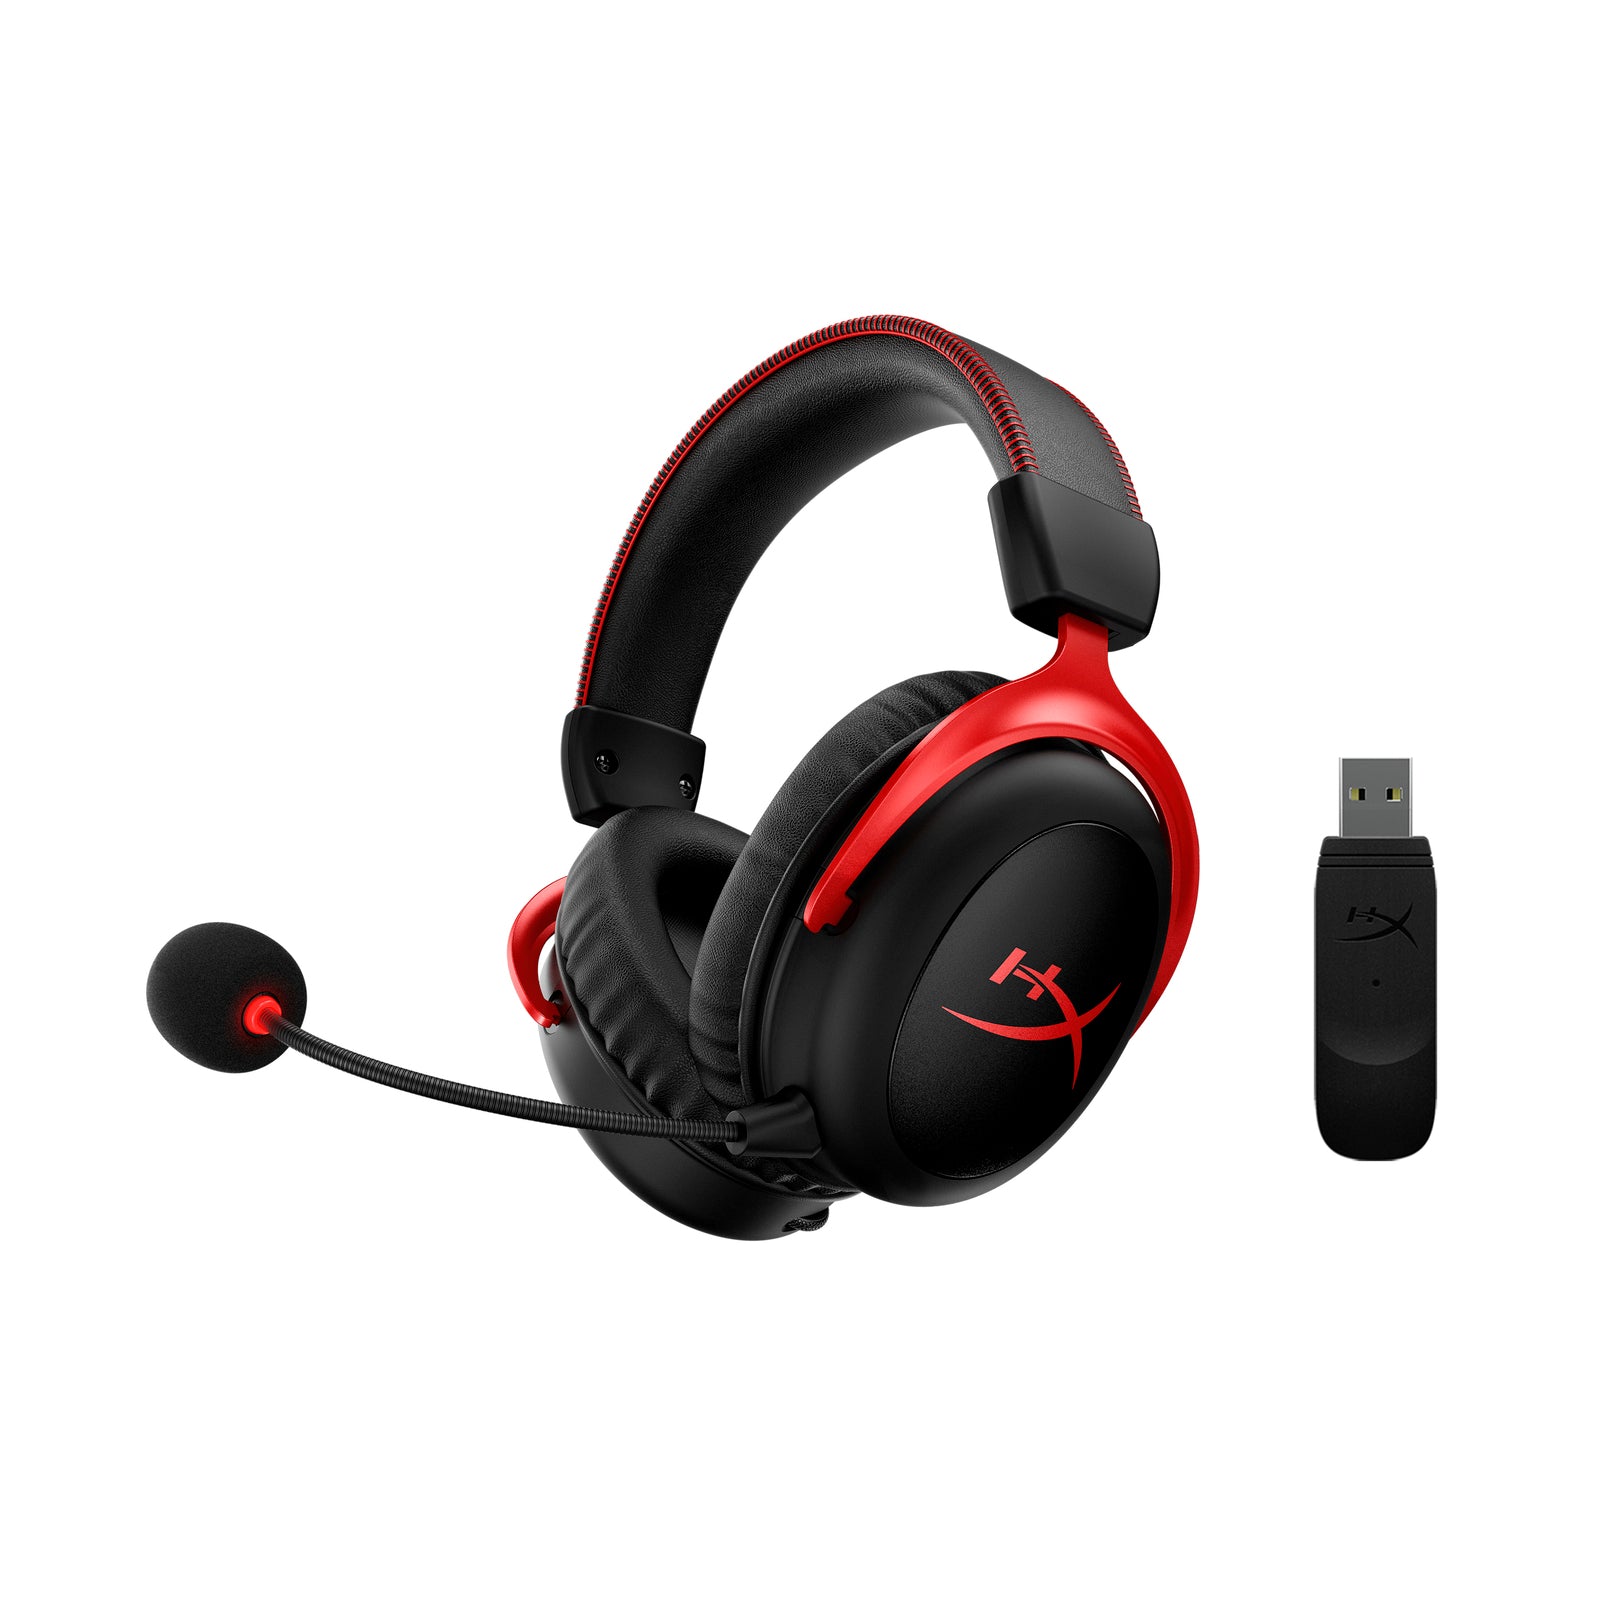 HyperX Cloud II wireless gaming headset displaying detachable noise cancelling microphone and USB Wireless Adapter